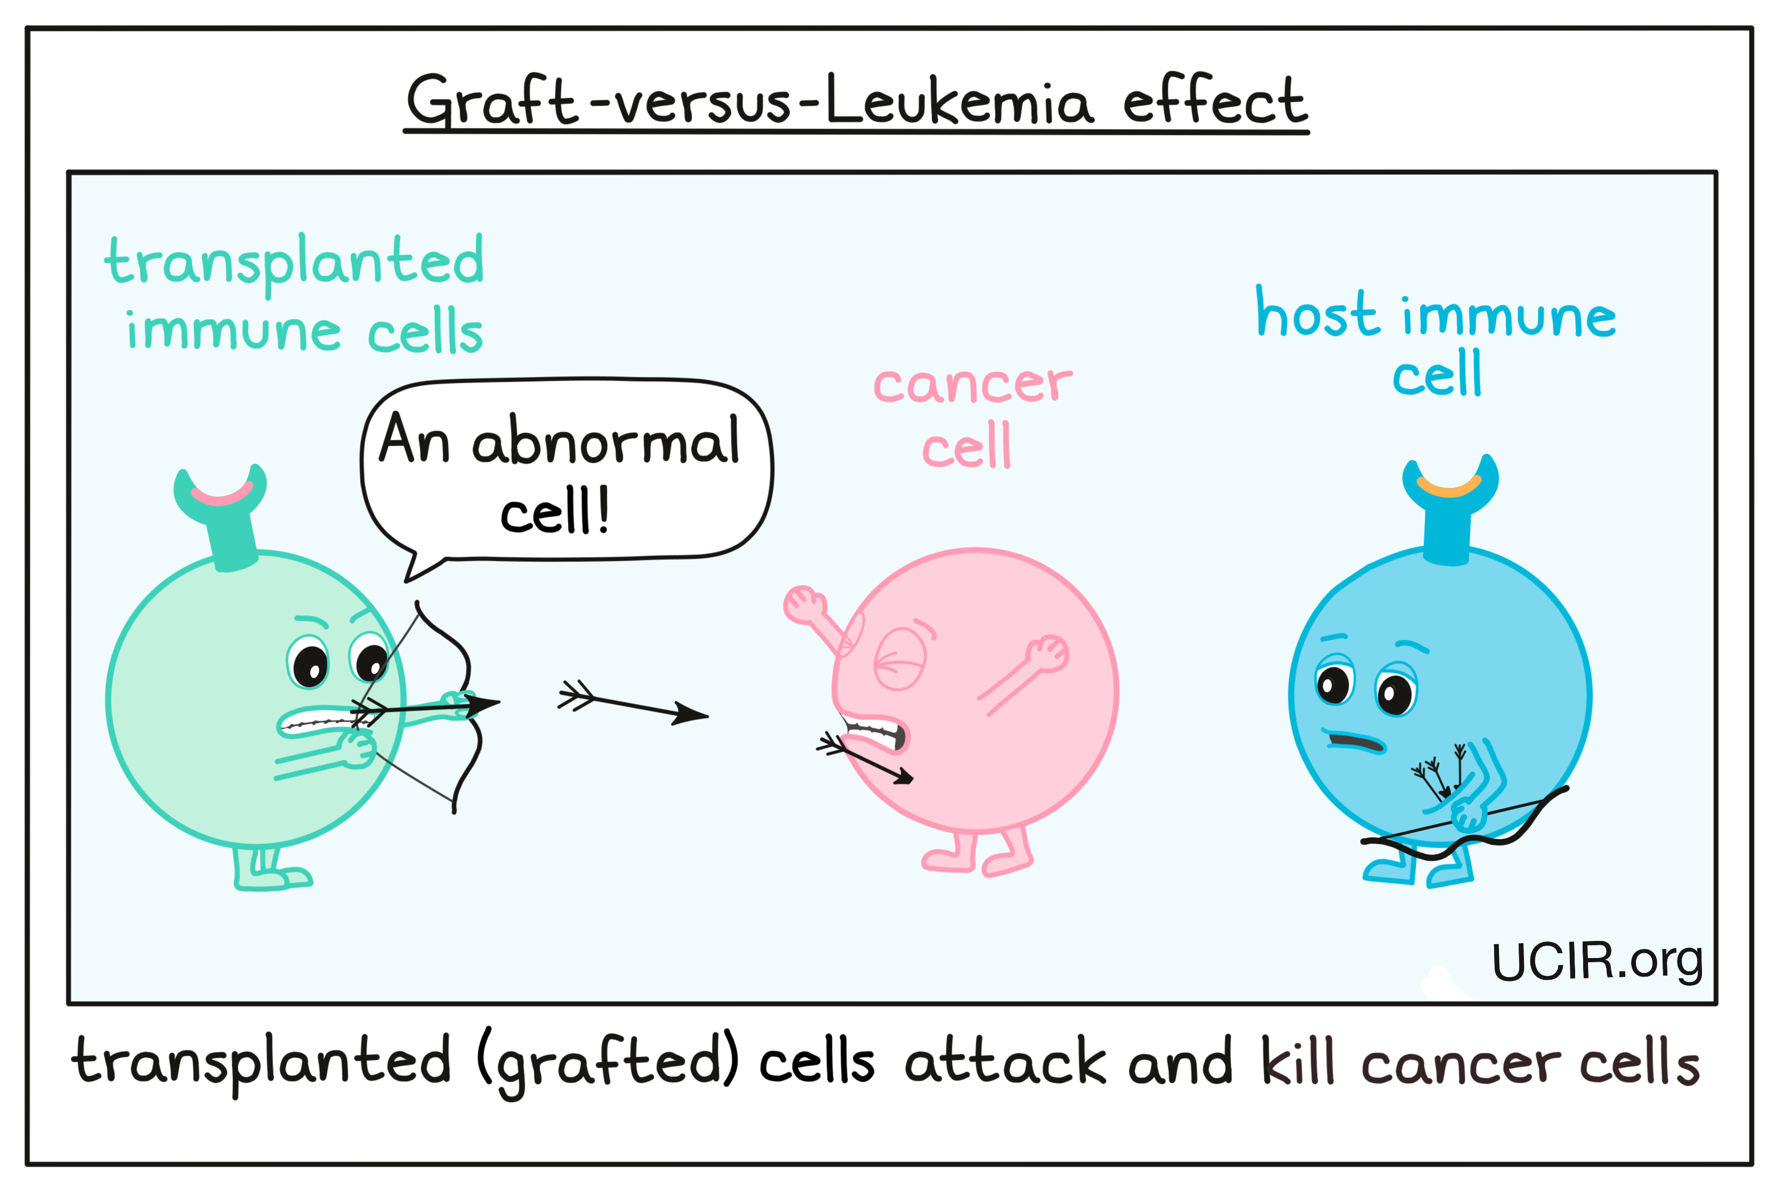 Illustration showing grafted cells attacking and killing cancer cells